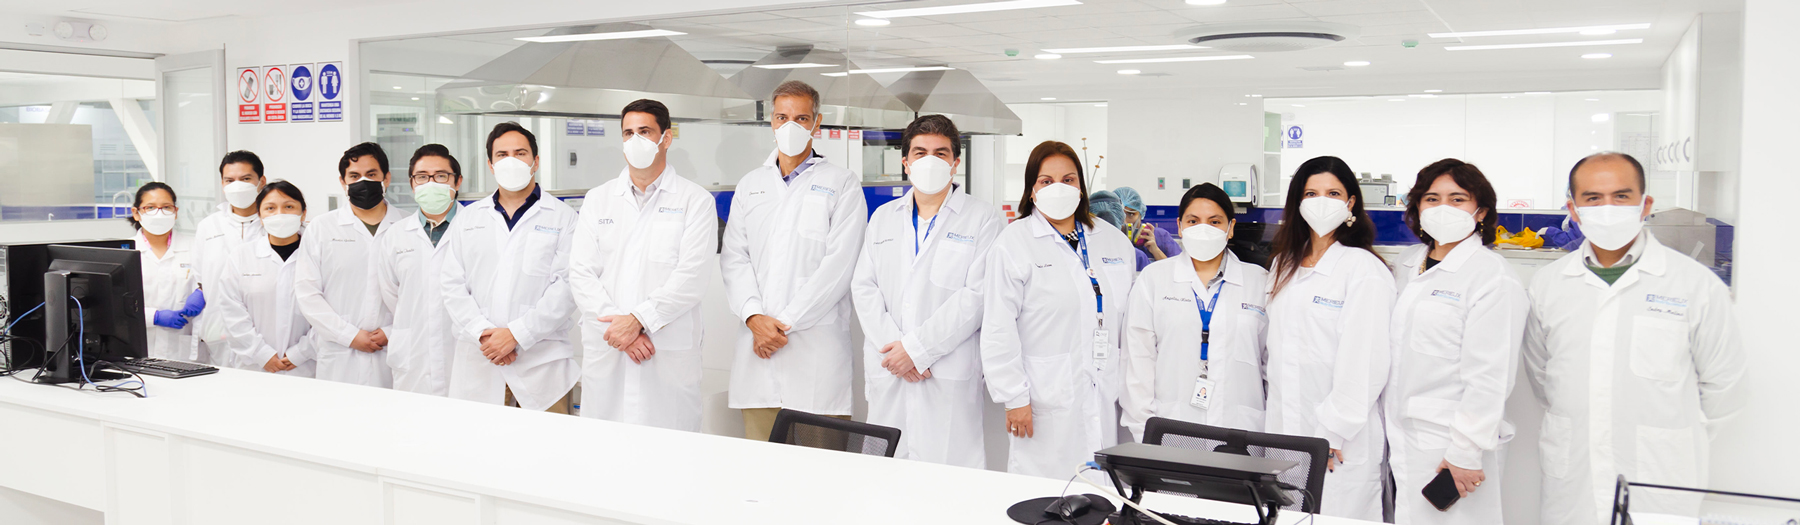 Mérieux NutriSciences opens new food testing laboratory in Lima, Peru